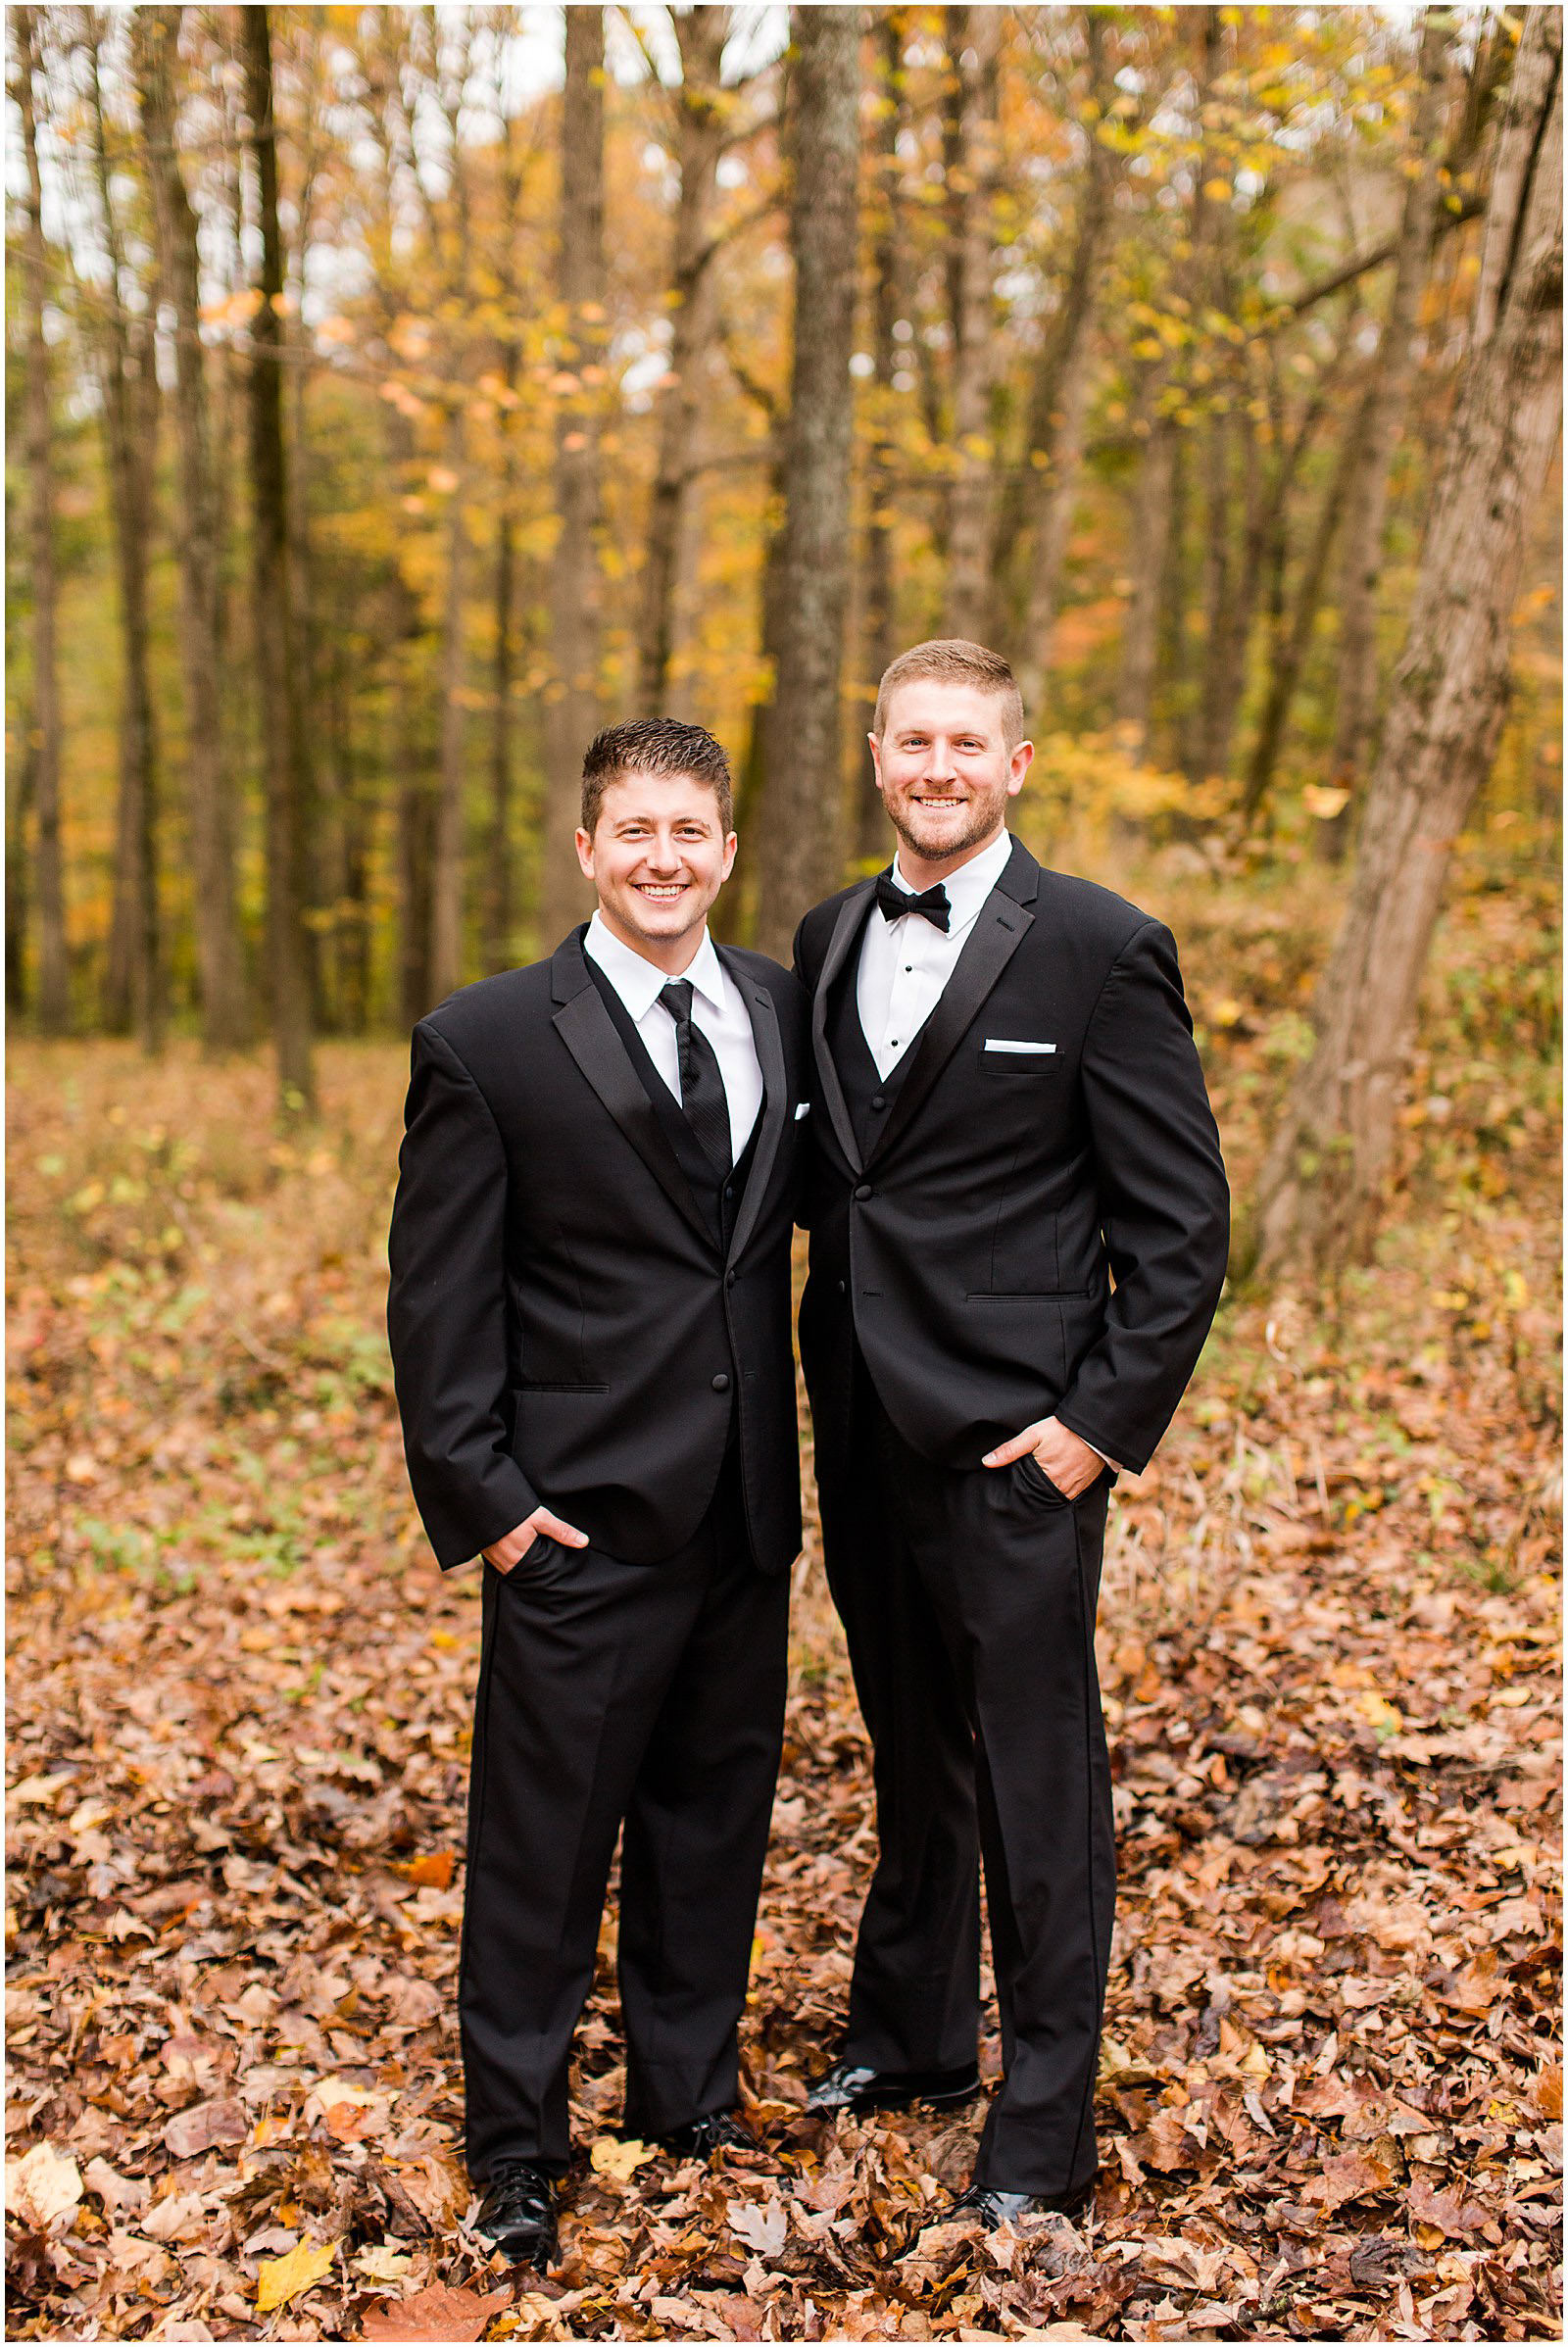 A Romantic Fall Wedding in Ferdinand, IN | Tori and Kyle | Bret and Brandie Photography 0071.jpg